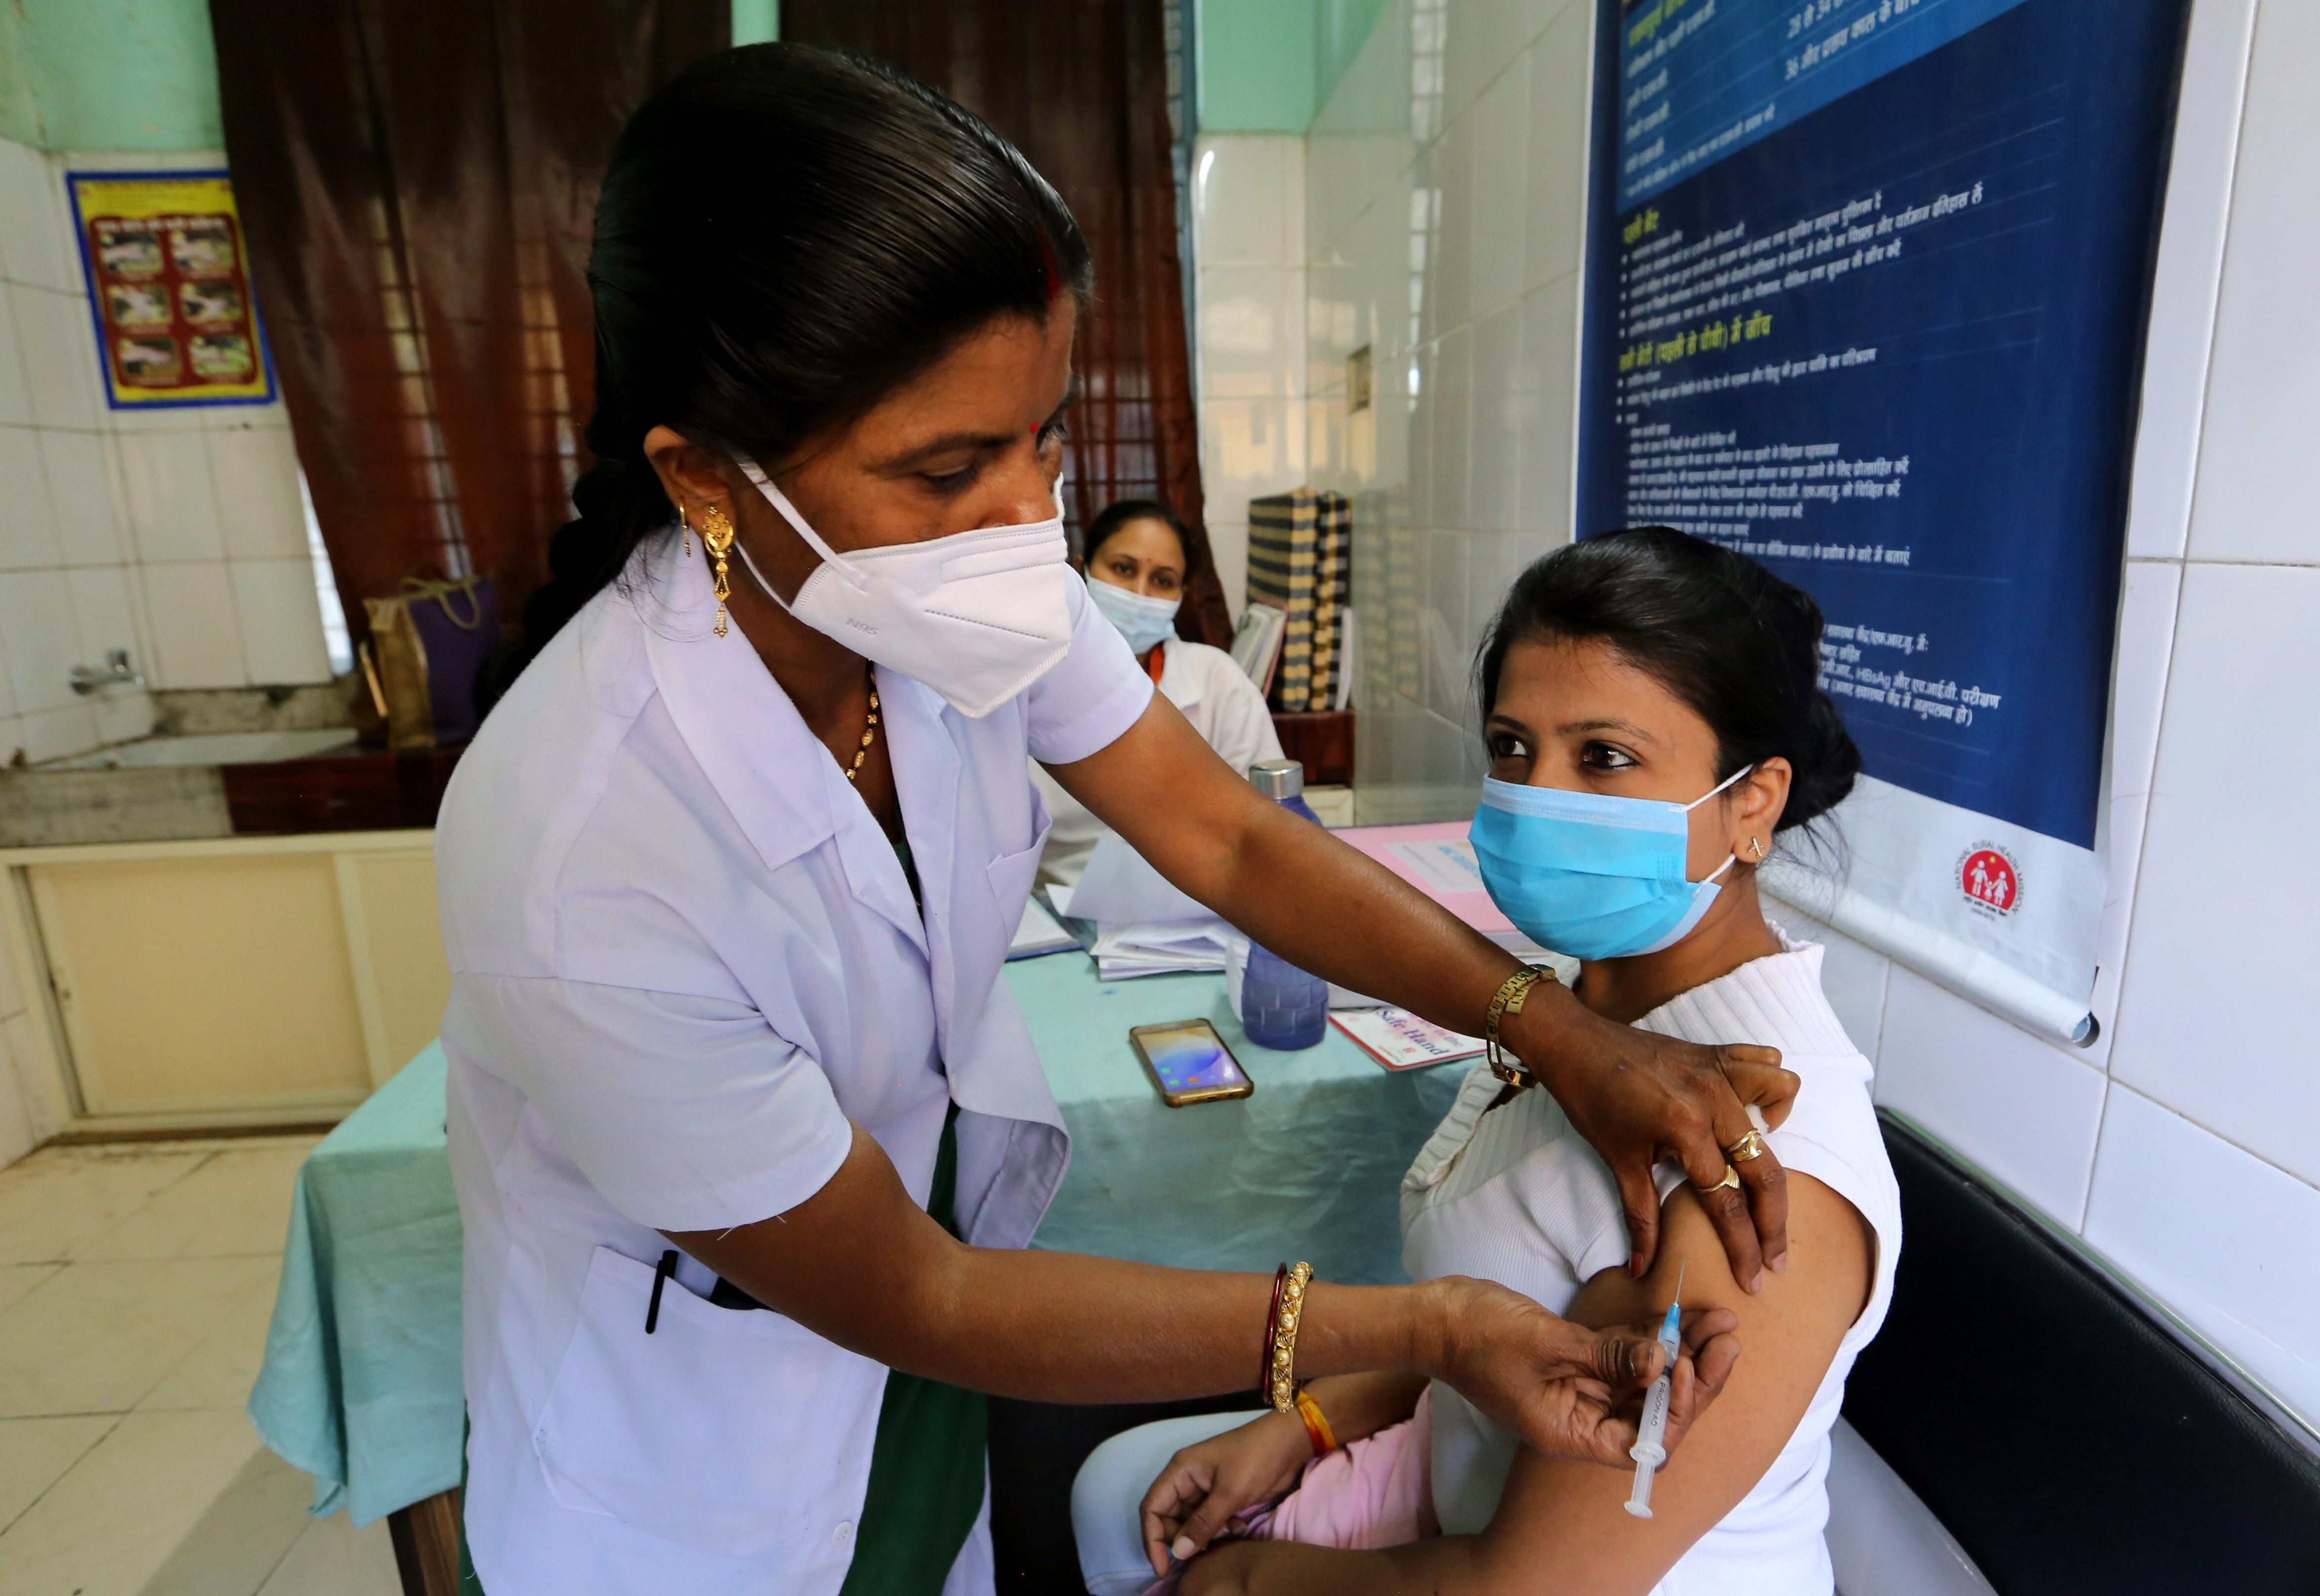 A woman receives a shot of a Covid-19 vaccine in Bhopal, India, on March 6. India, South Africa and other countries have proposed that the WTO exempt member countries from enforcing some patents and other intellectual property rights for a limited period to help countries contain Covid-19. Photo: EPA-EFE